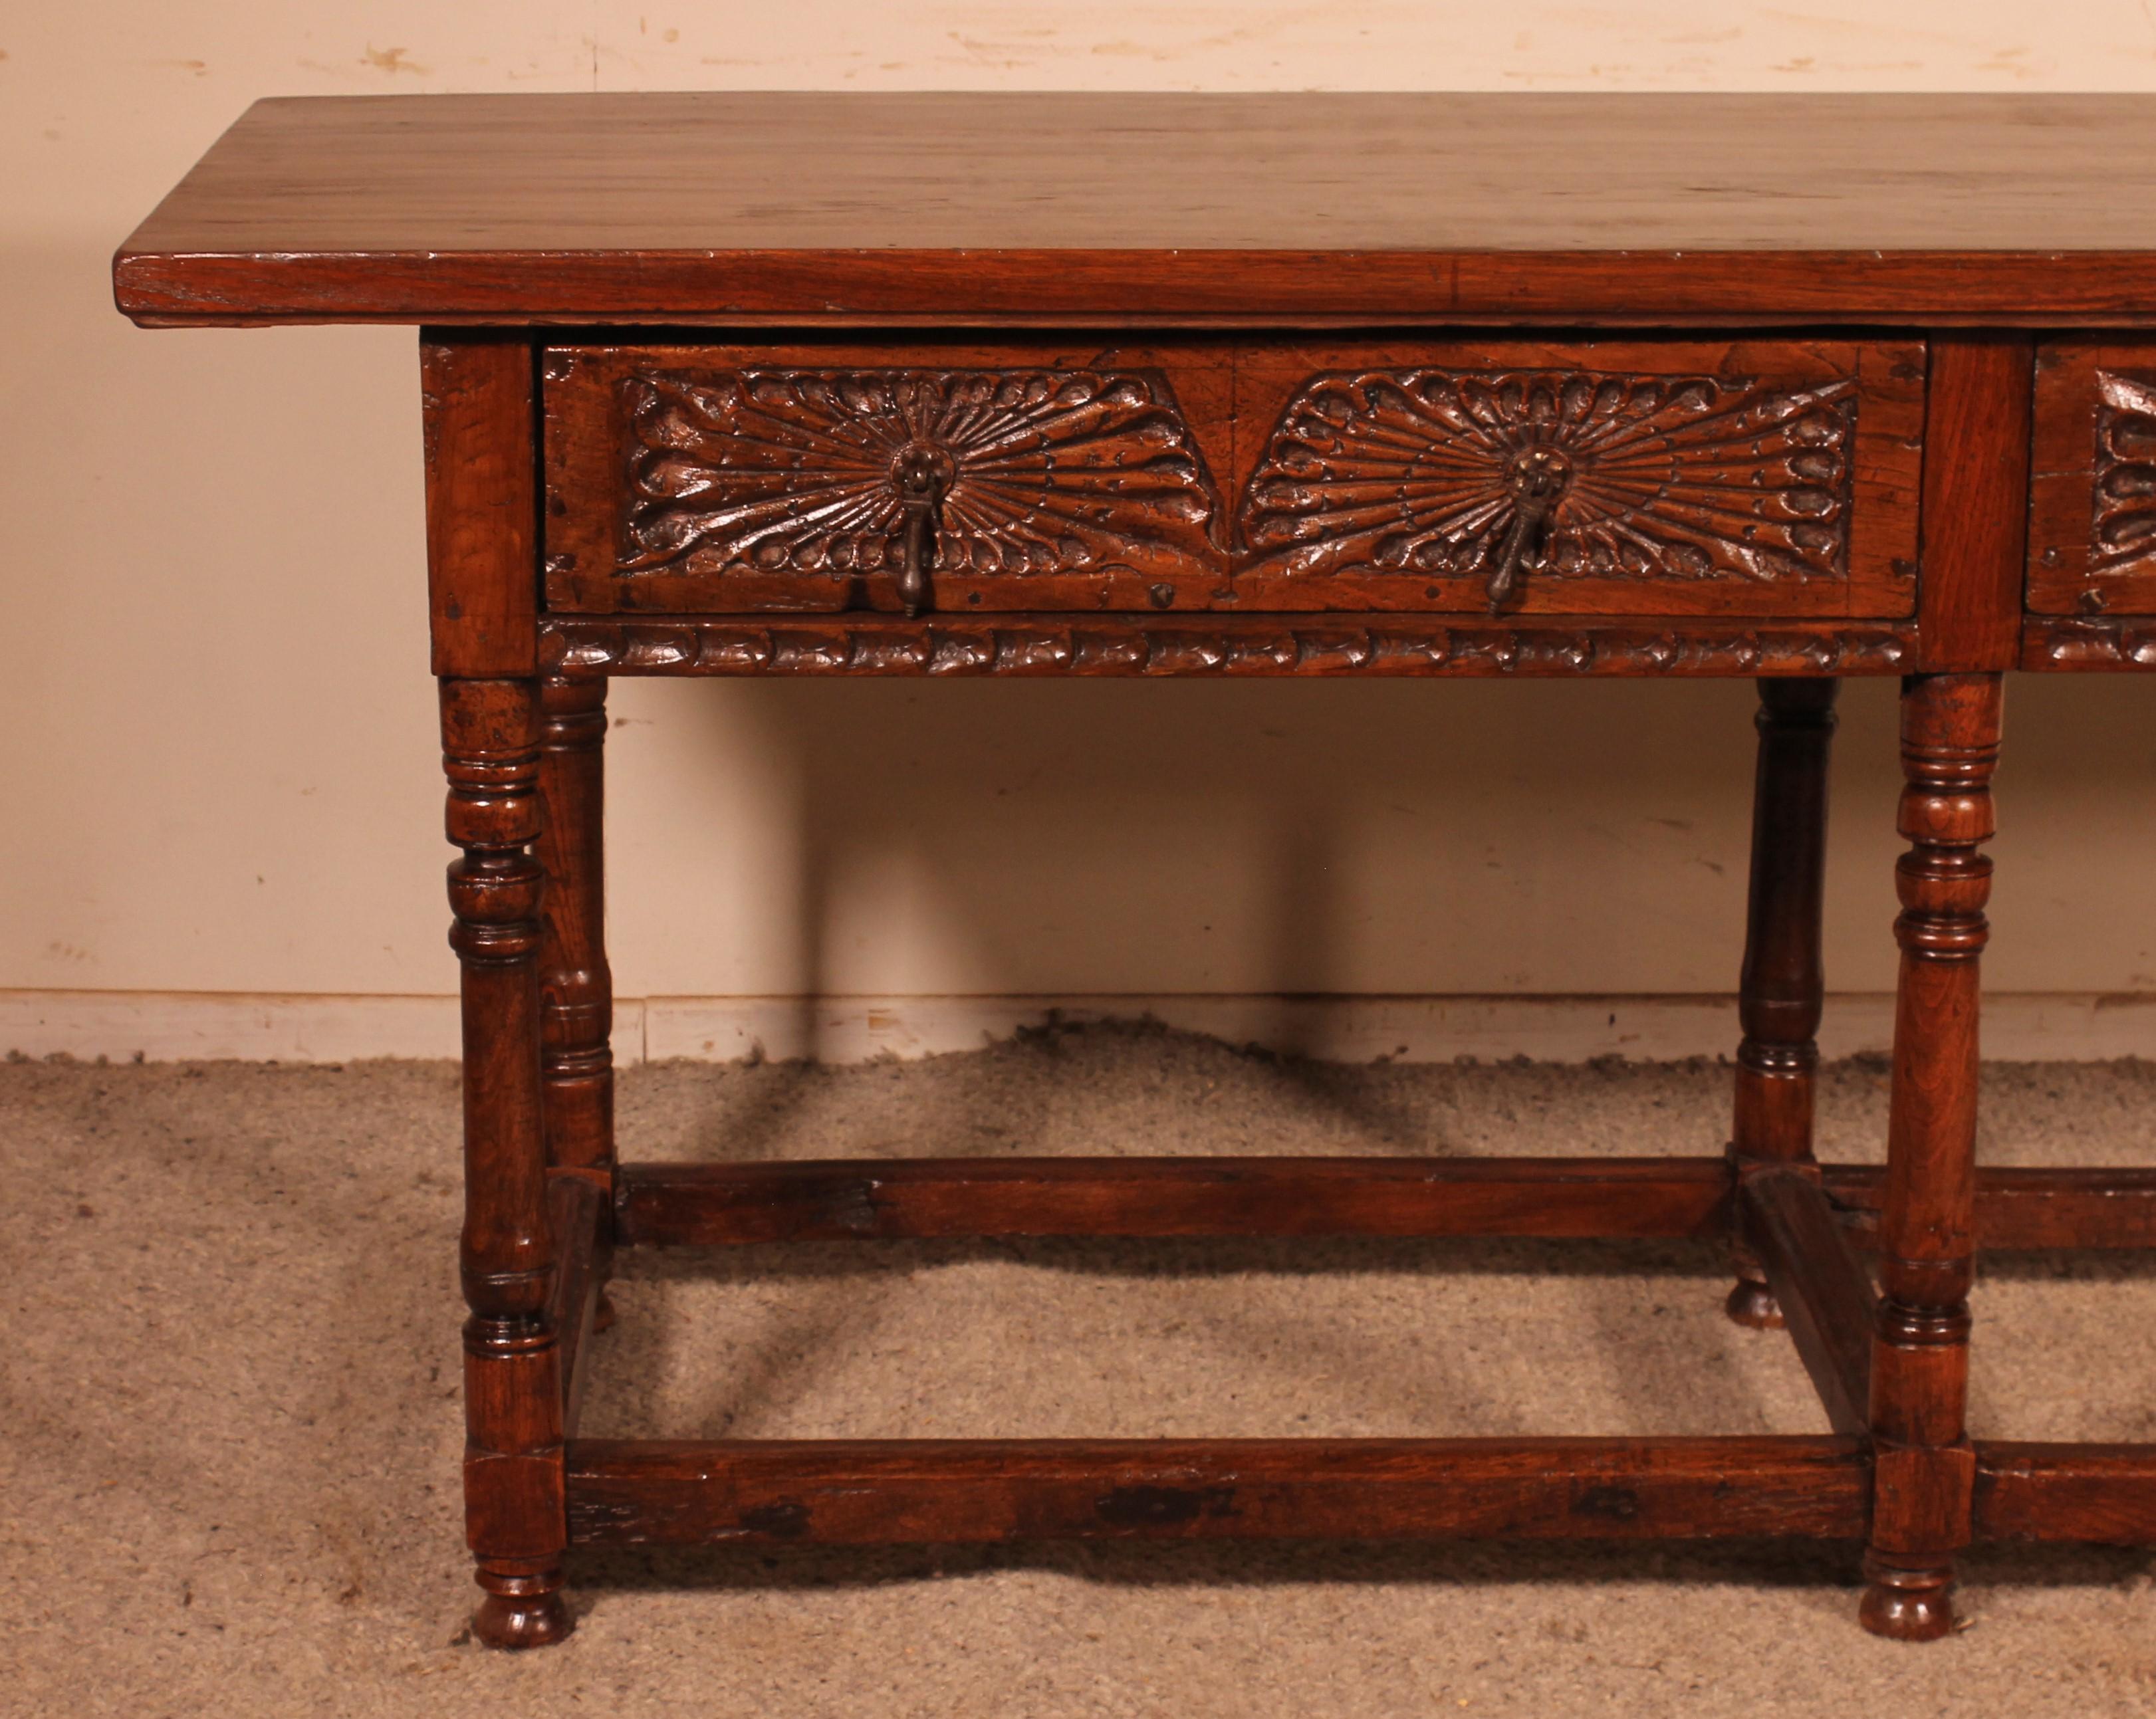 Superb console of the Spanish Renaissance in chestnut from the 17th century

Very elegant table which has two carved drawers in the belt. We can find the same sculpture on both sides The table has been worked on both sides. It is therefore possible